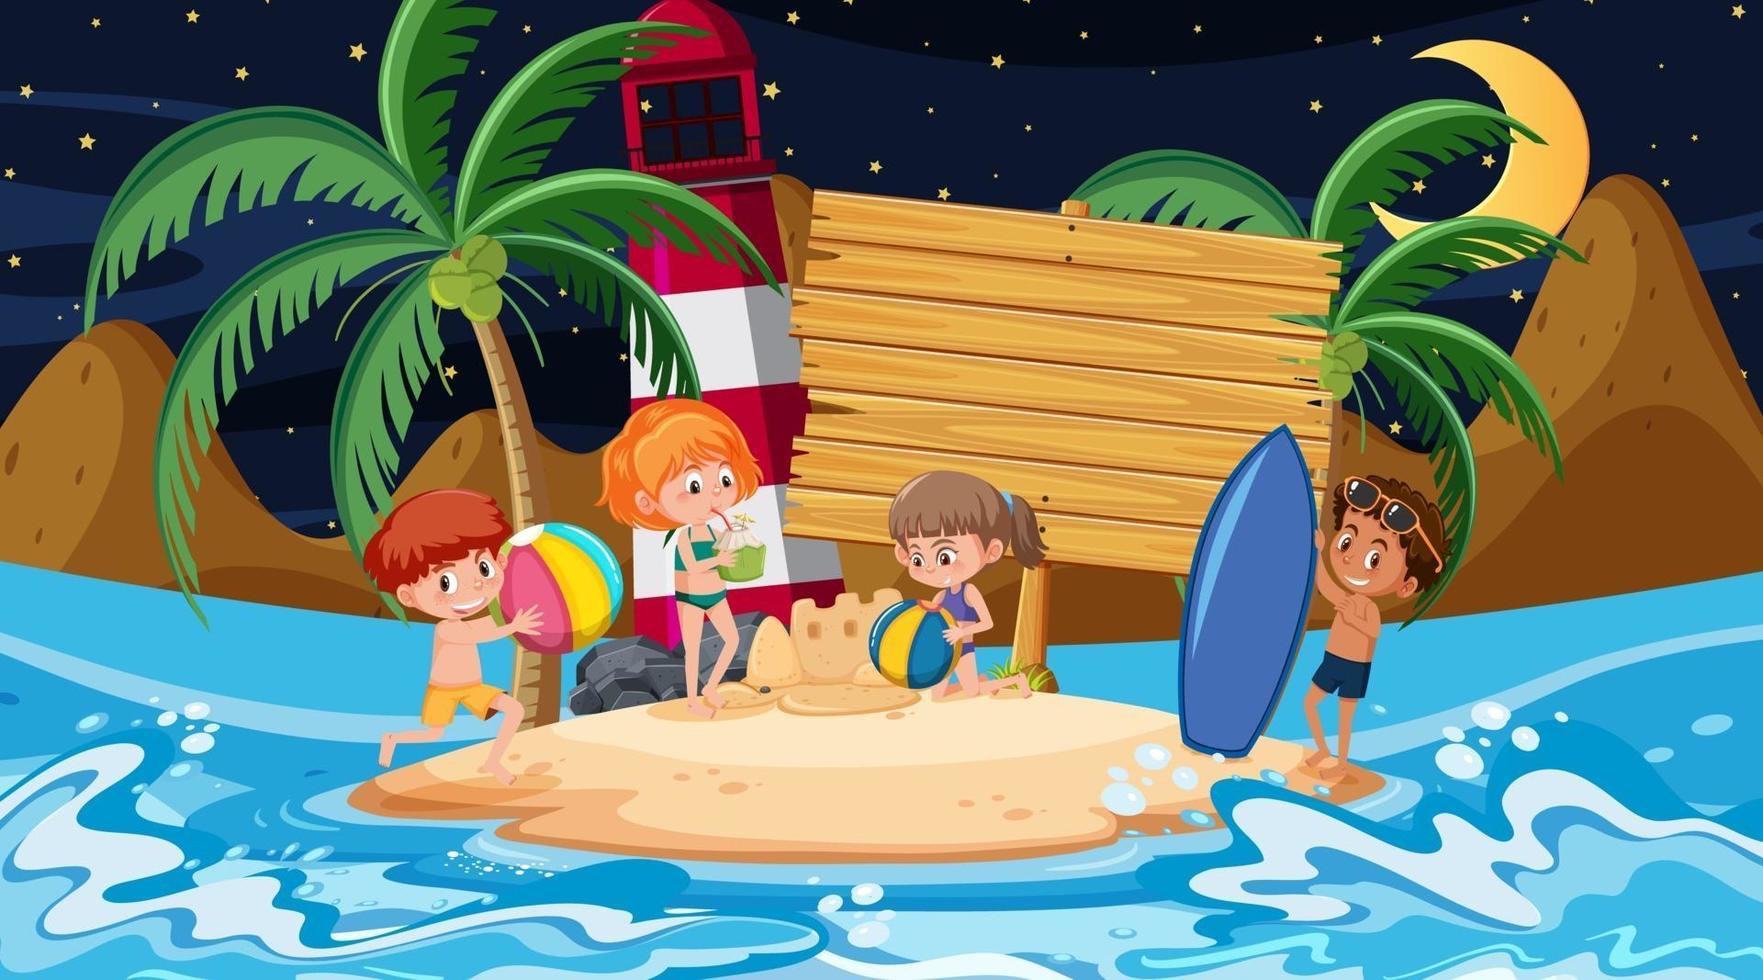 Kids on vacation at the beach night scene with an empty wooden banner template vector